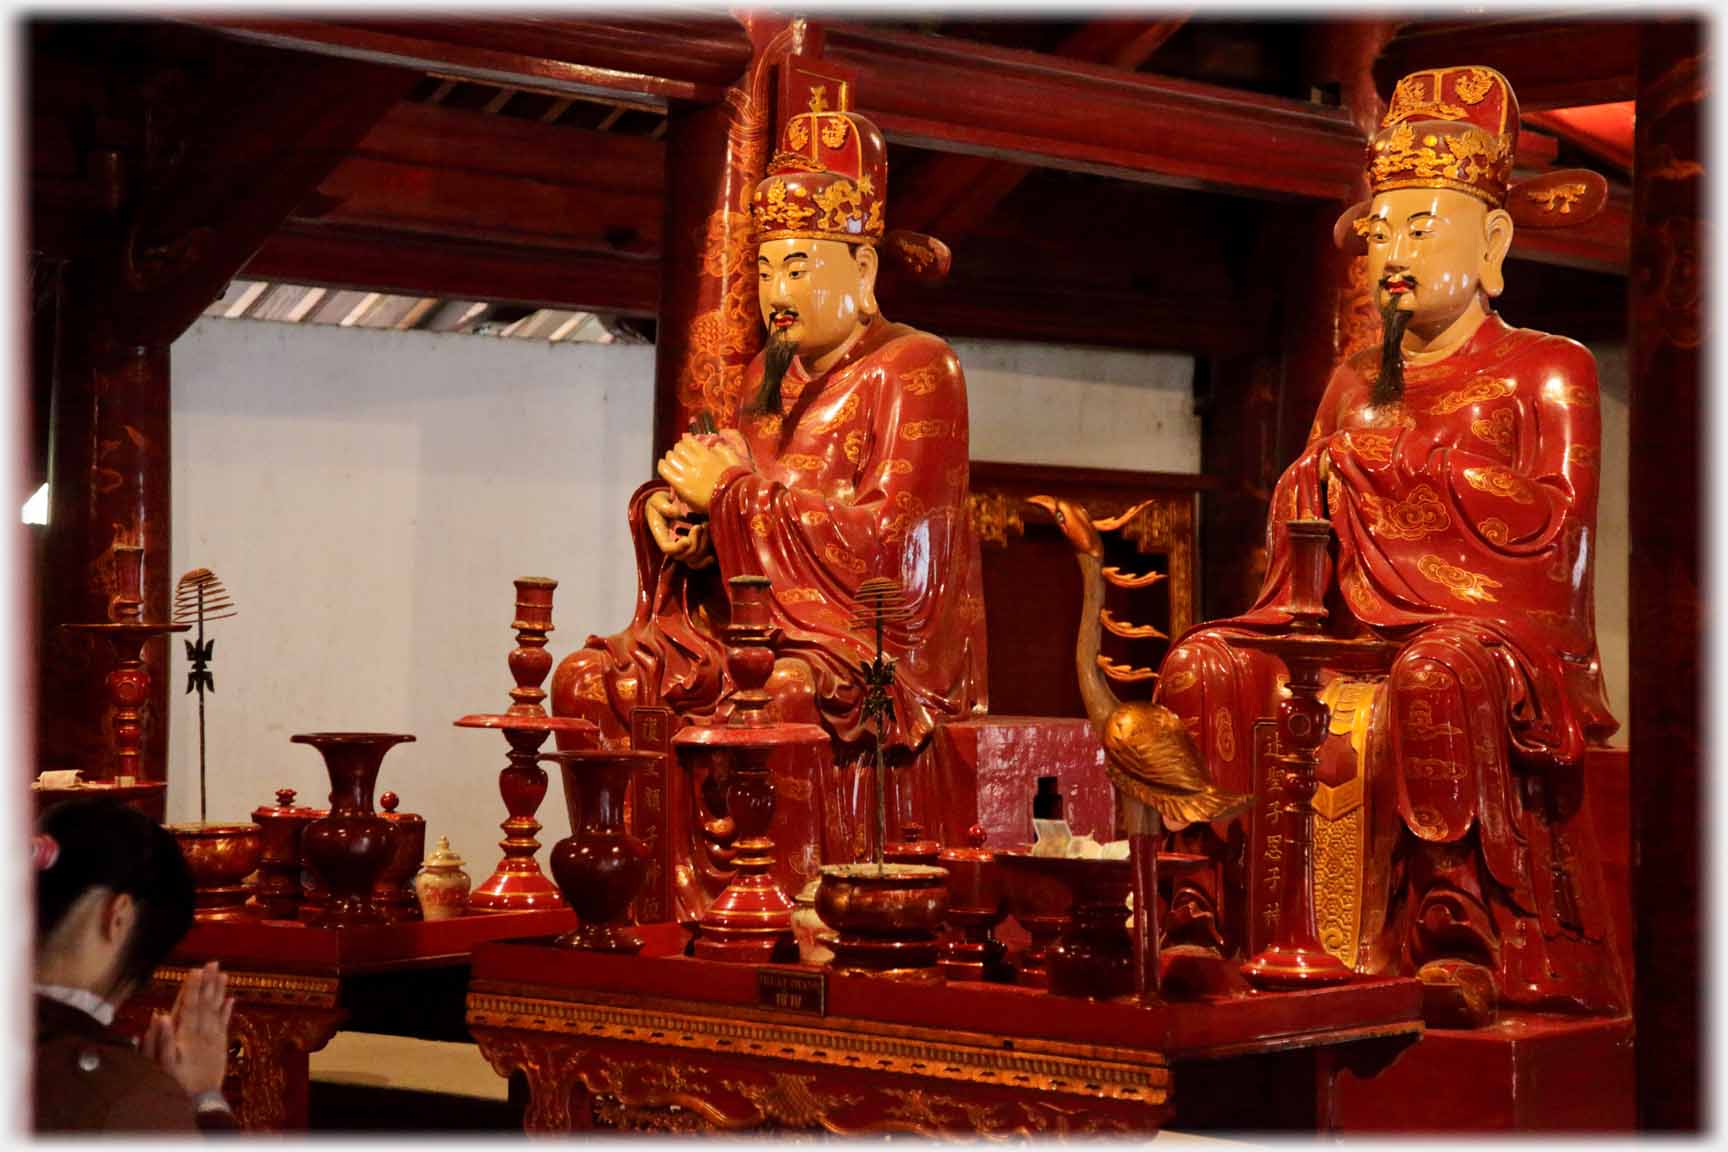 Two red and gold seated figures looking left, praying hands visible.